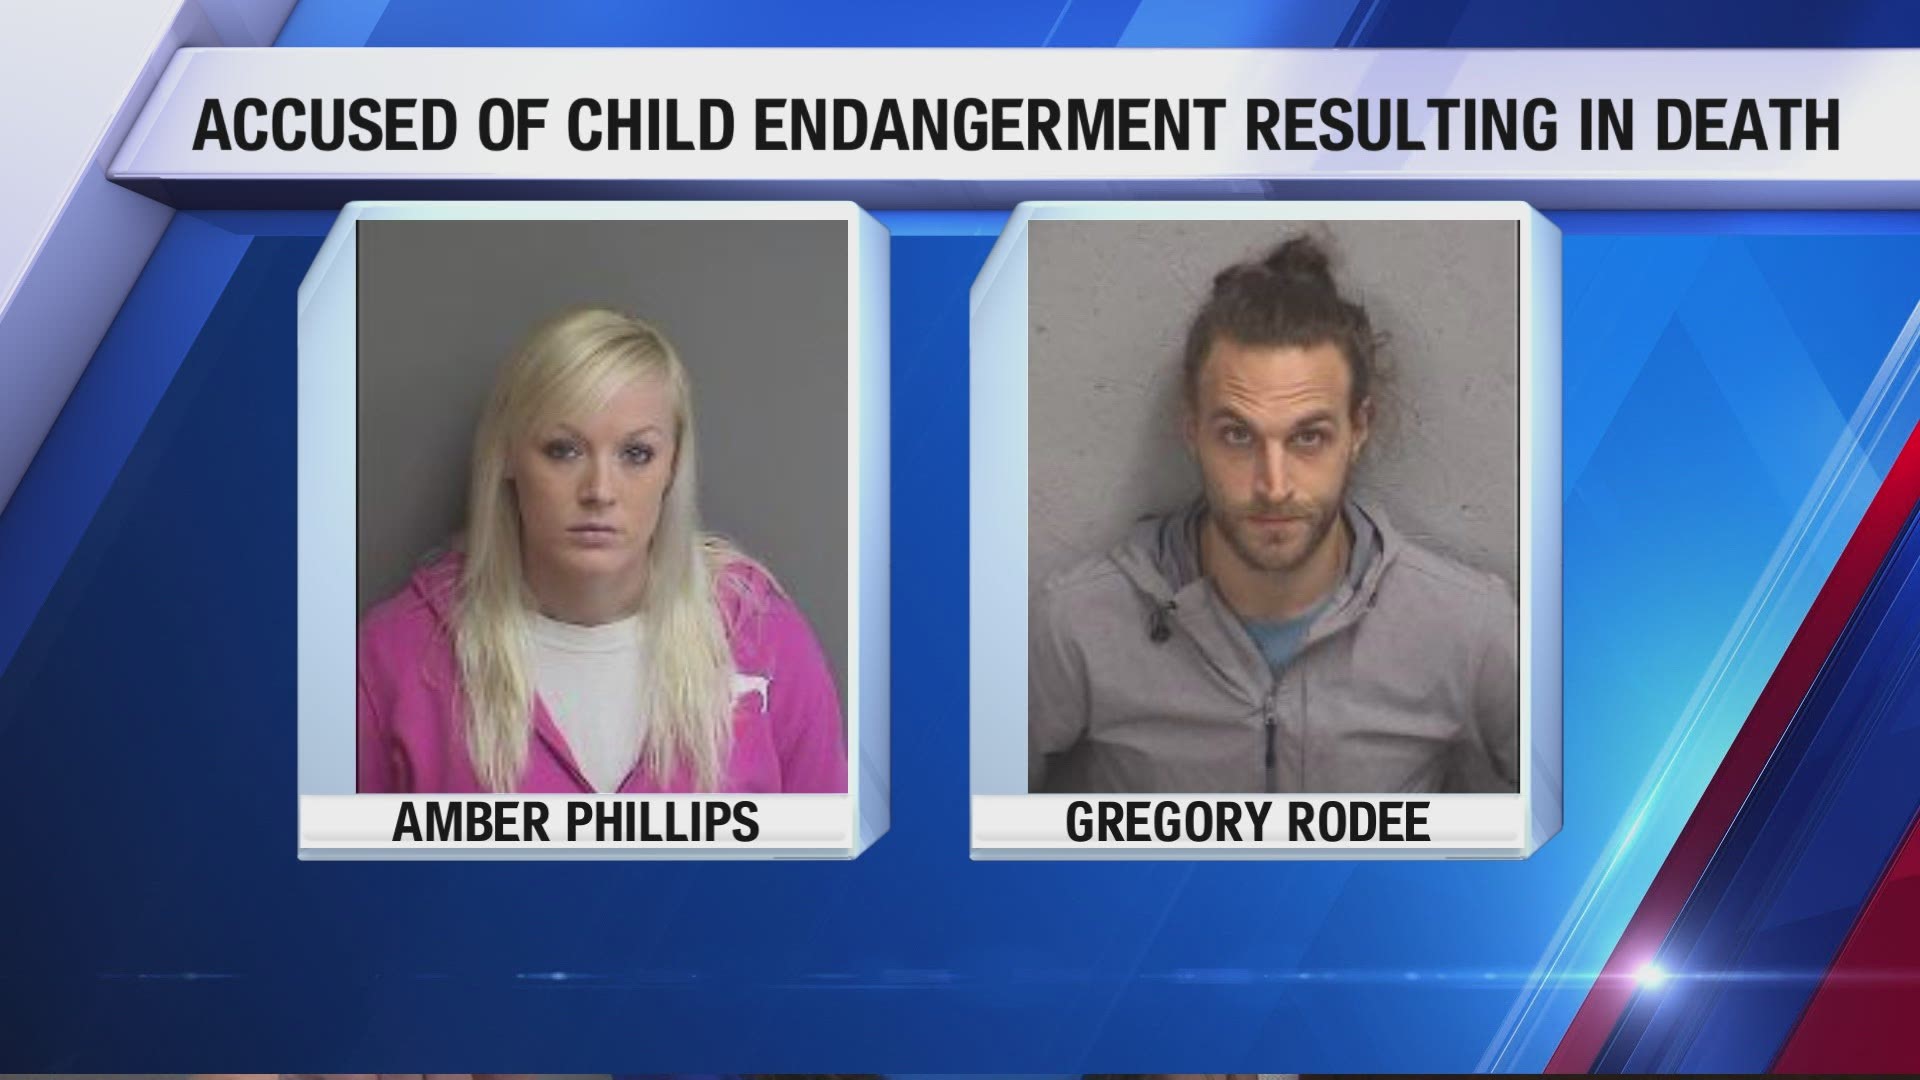 Amber Phillips and Gregory Rodee were arrested after their baby died in June.